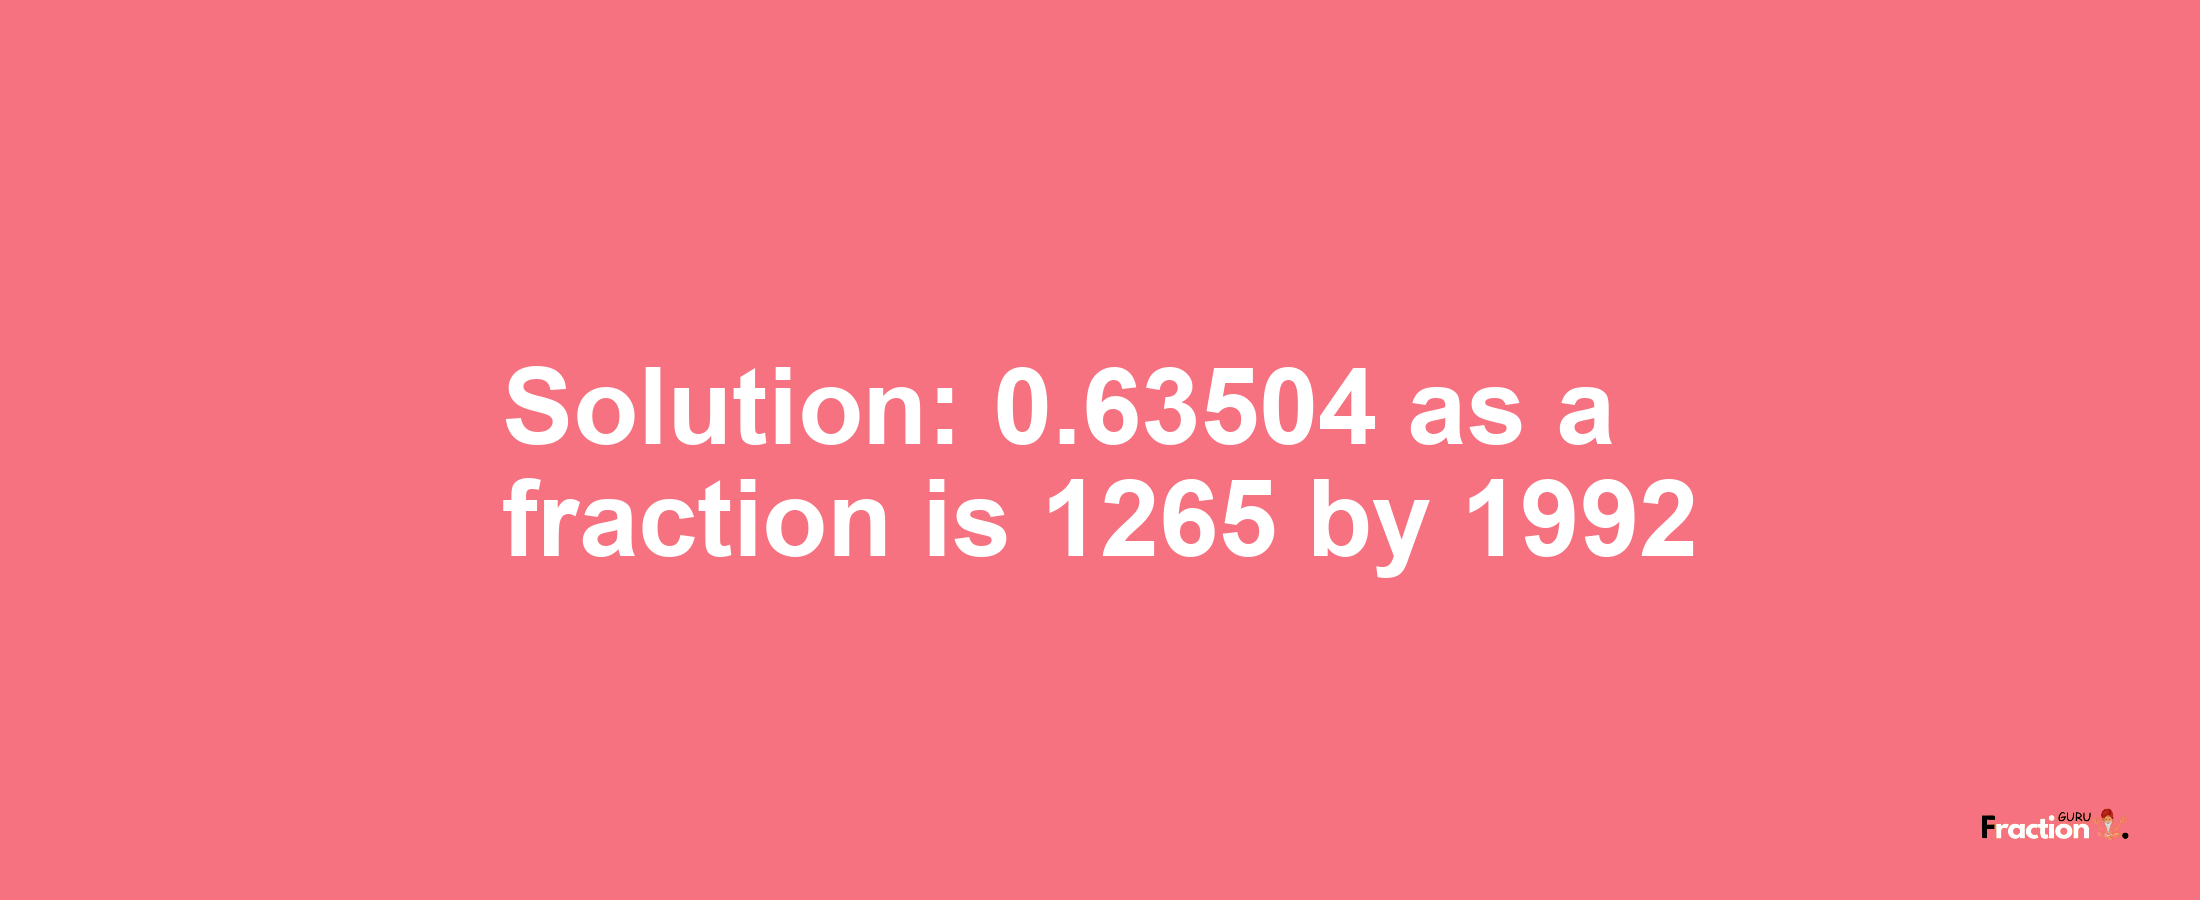 Solution:0.63504 as a fraction is 1265/1992